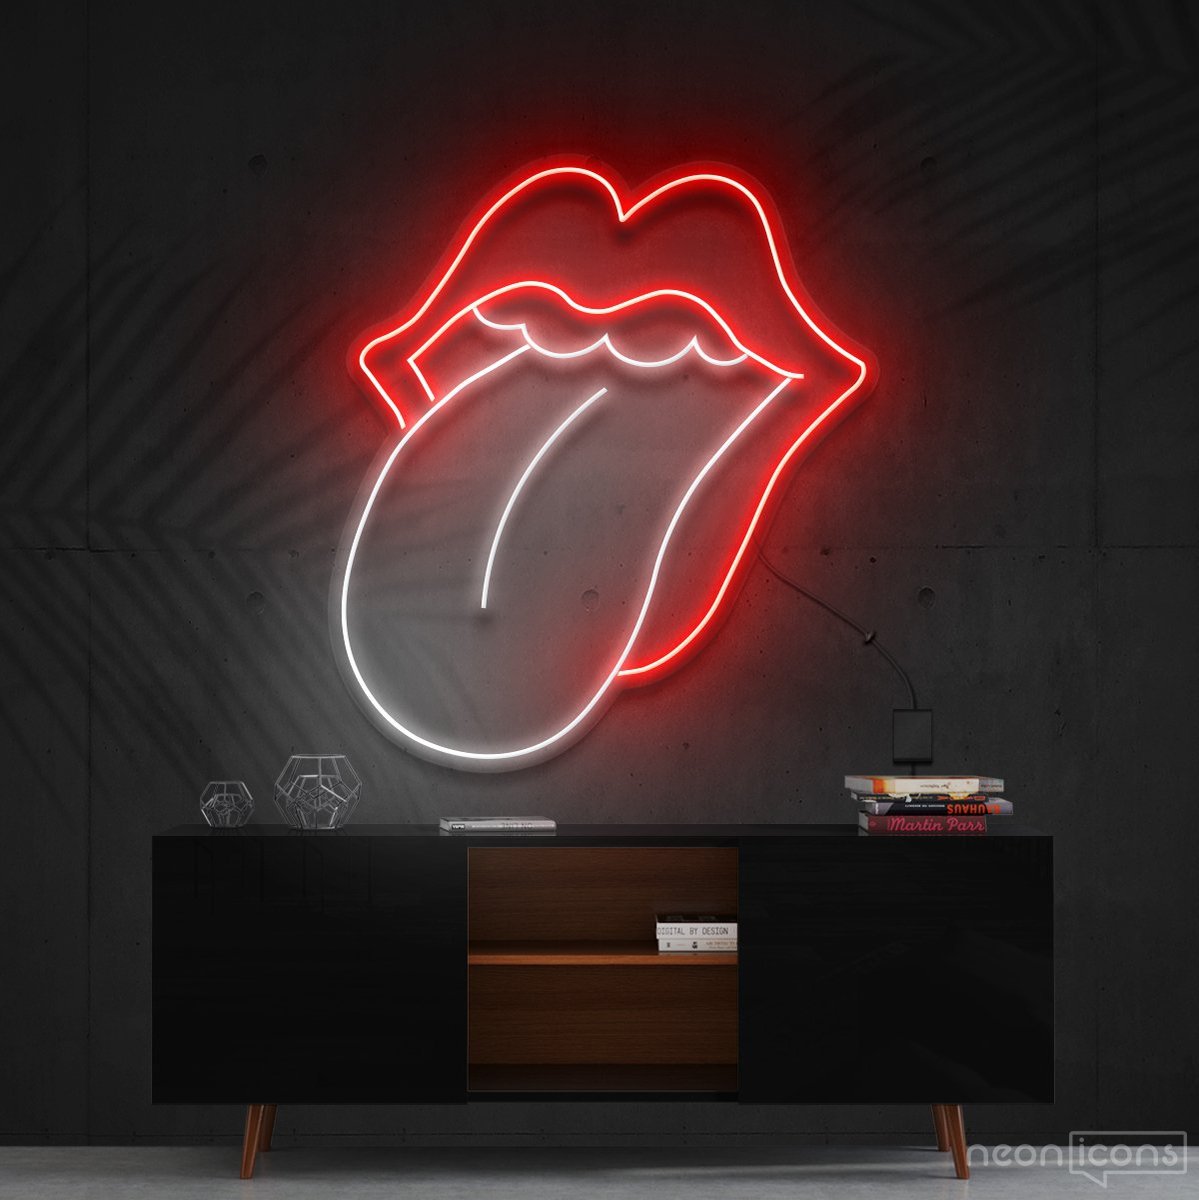 "Rolling Stones" Multicolour Neon Sign 60cm (2ft) / Red & White / Cut to Shape by Neon Icons